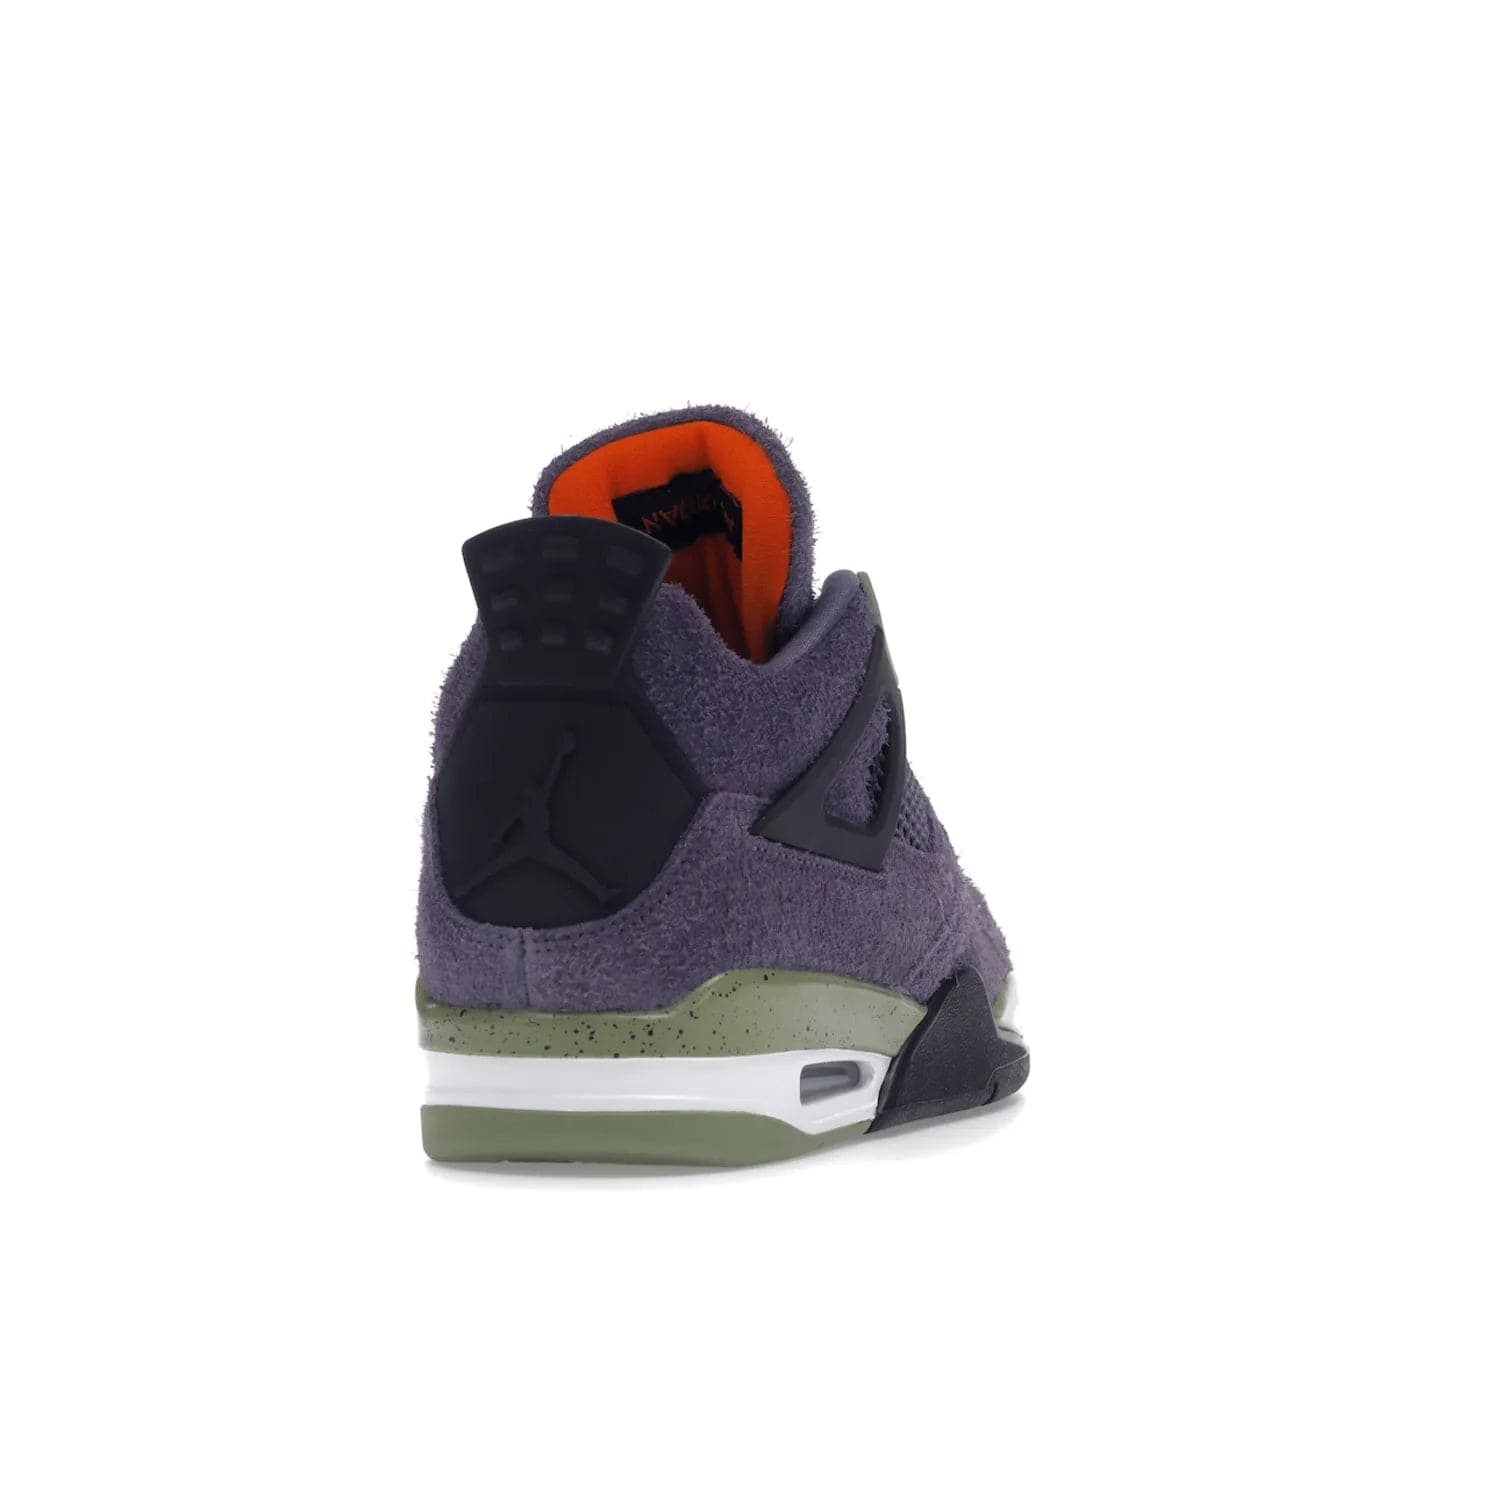 Jordan 4 Retro Canyon Purple (Women's) - Image 30 - Only at www.BallersClubKickz.com - New Air Jordan 4 Retro Canyon Purple W sneaker features shaggy purple suede, lime highlights & safety orange Jumpman branding. Classic ankle-hugging silhouette with modern colors released 15/10/2022.